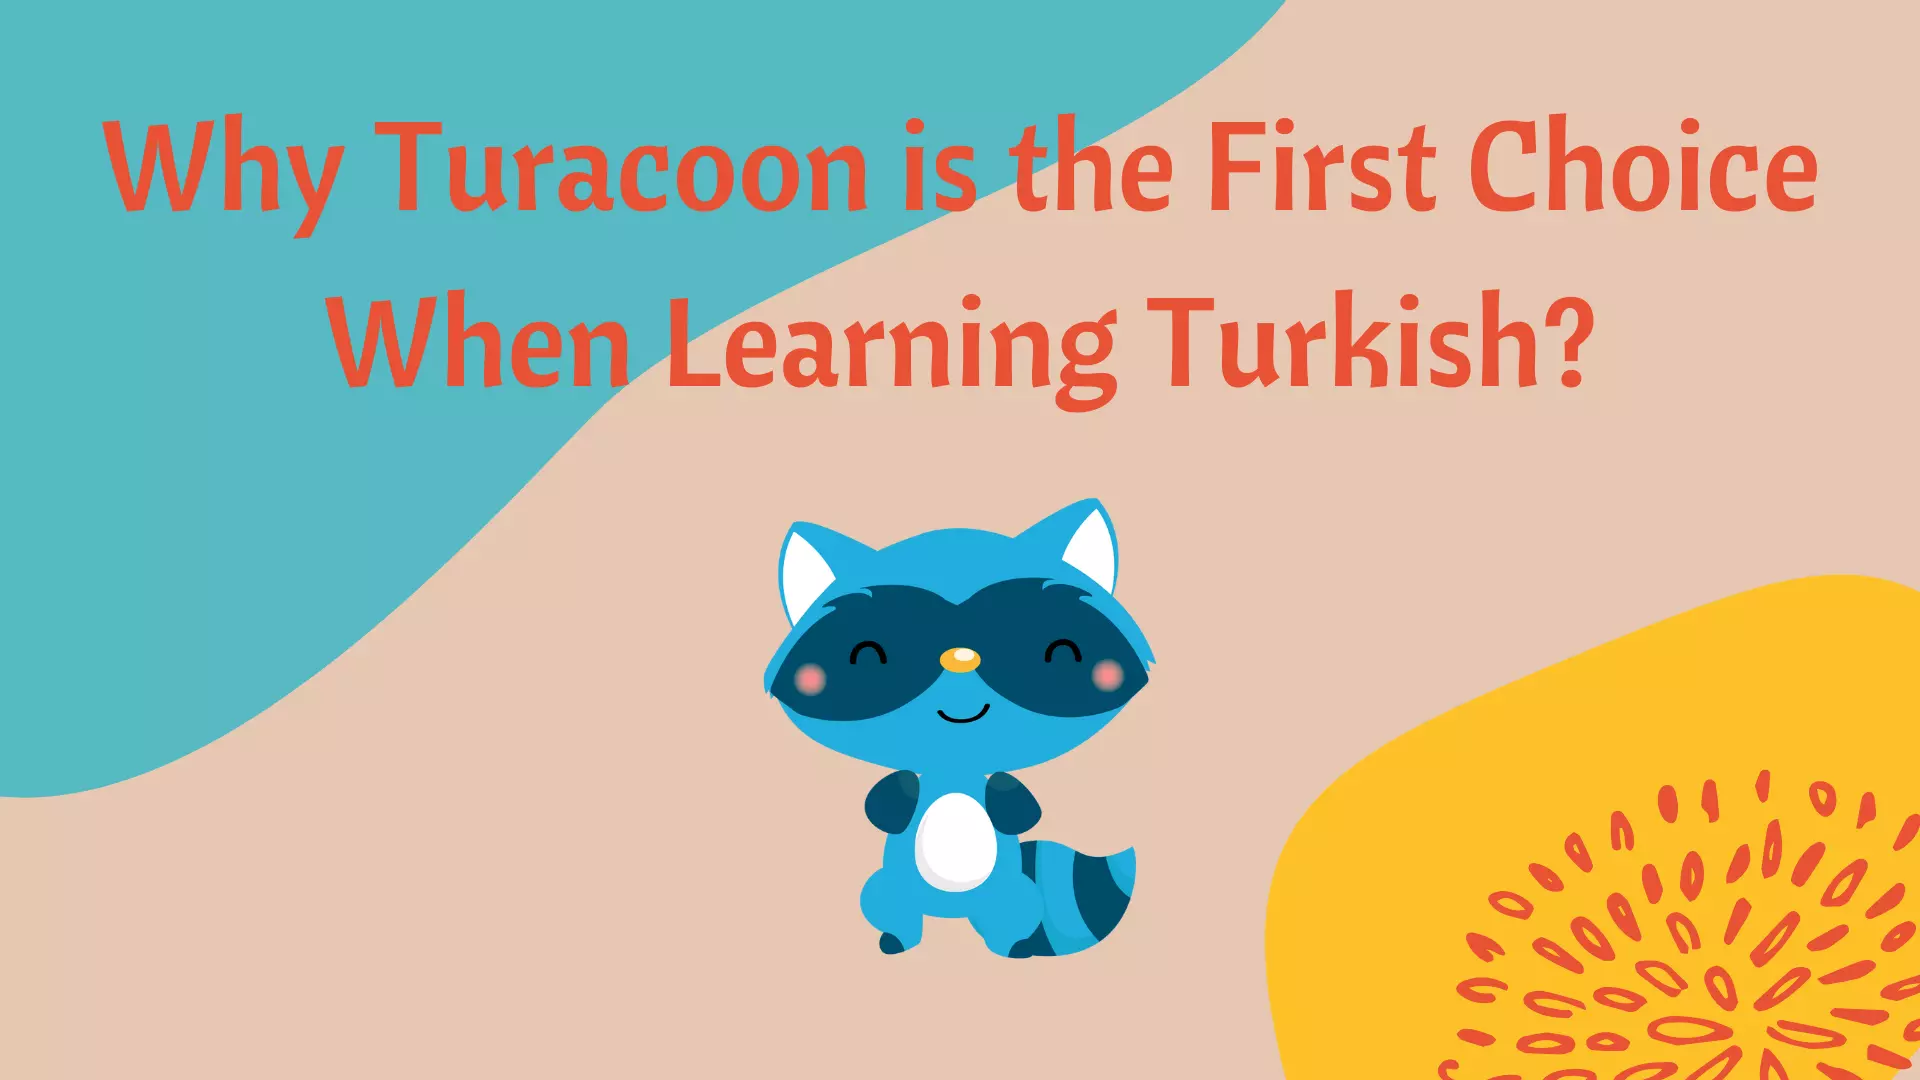 Why Turacoon is the First Choice When Learning Turkish?